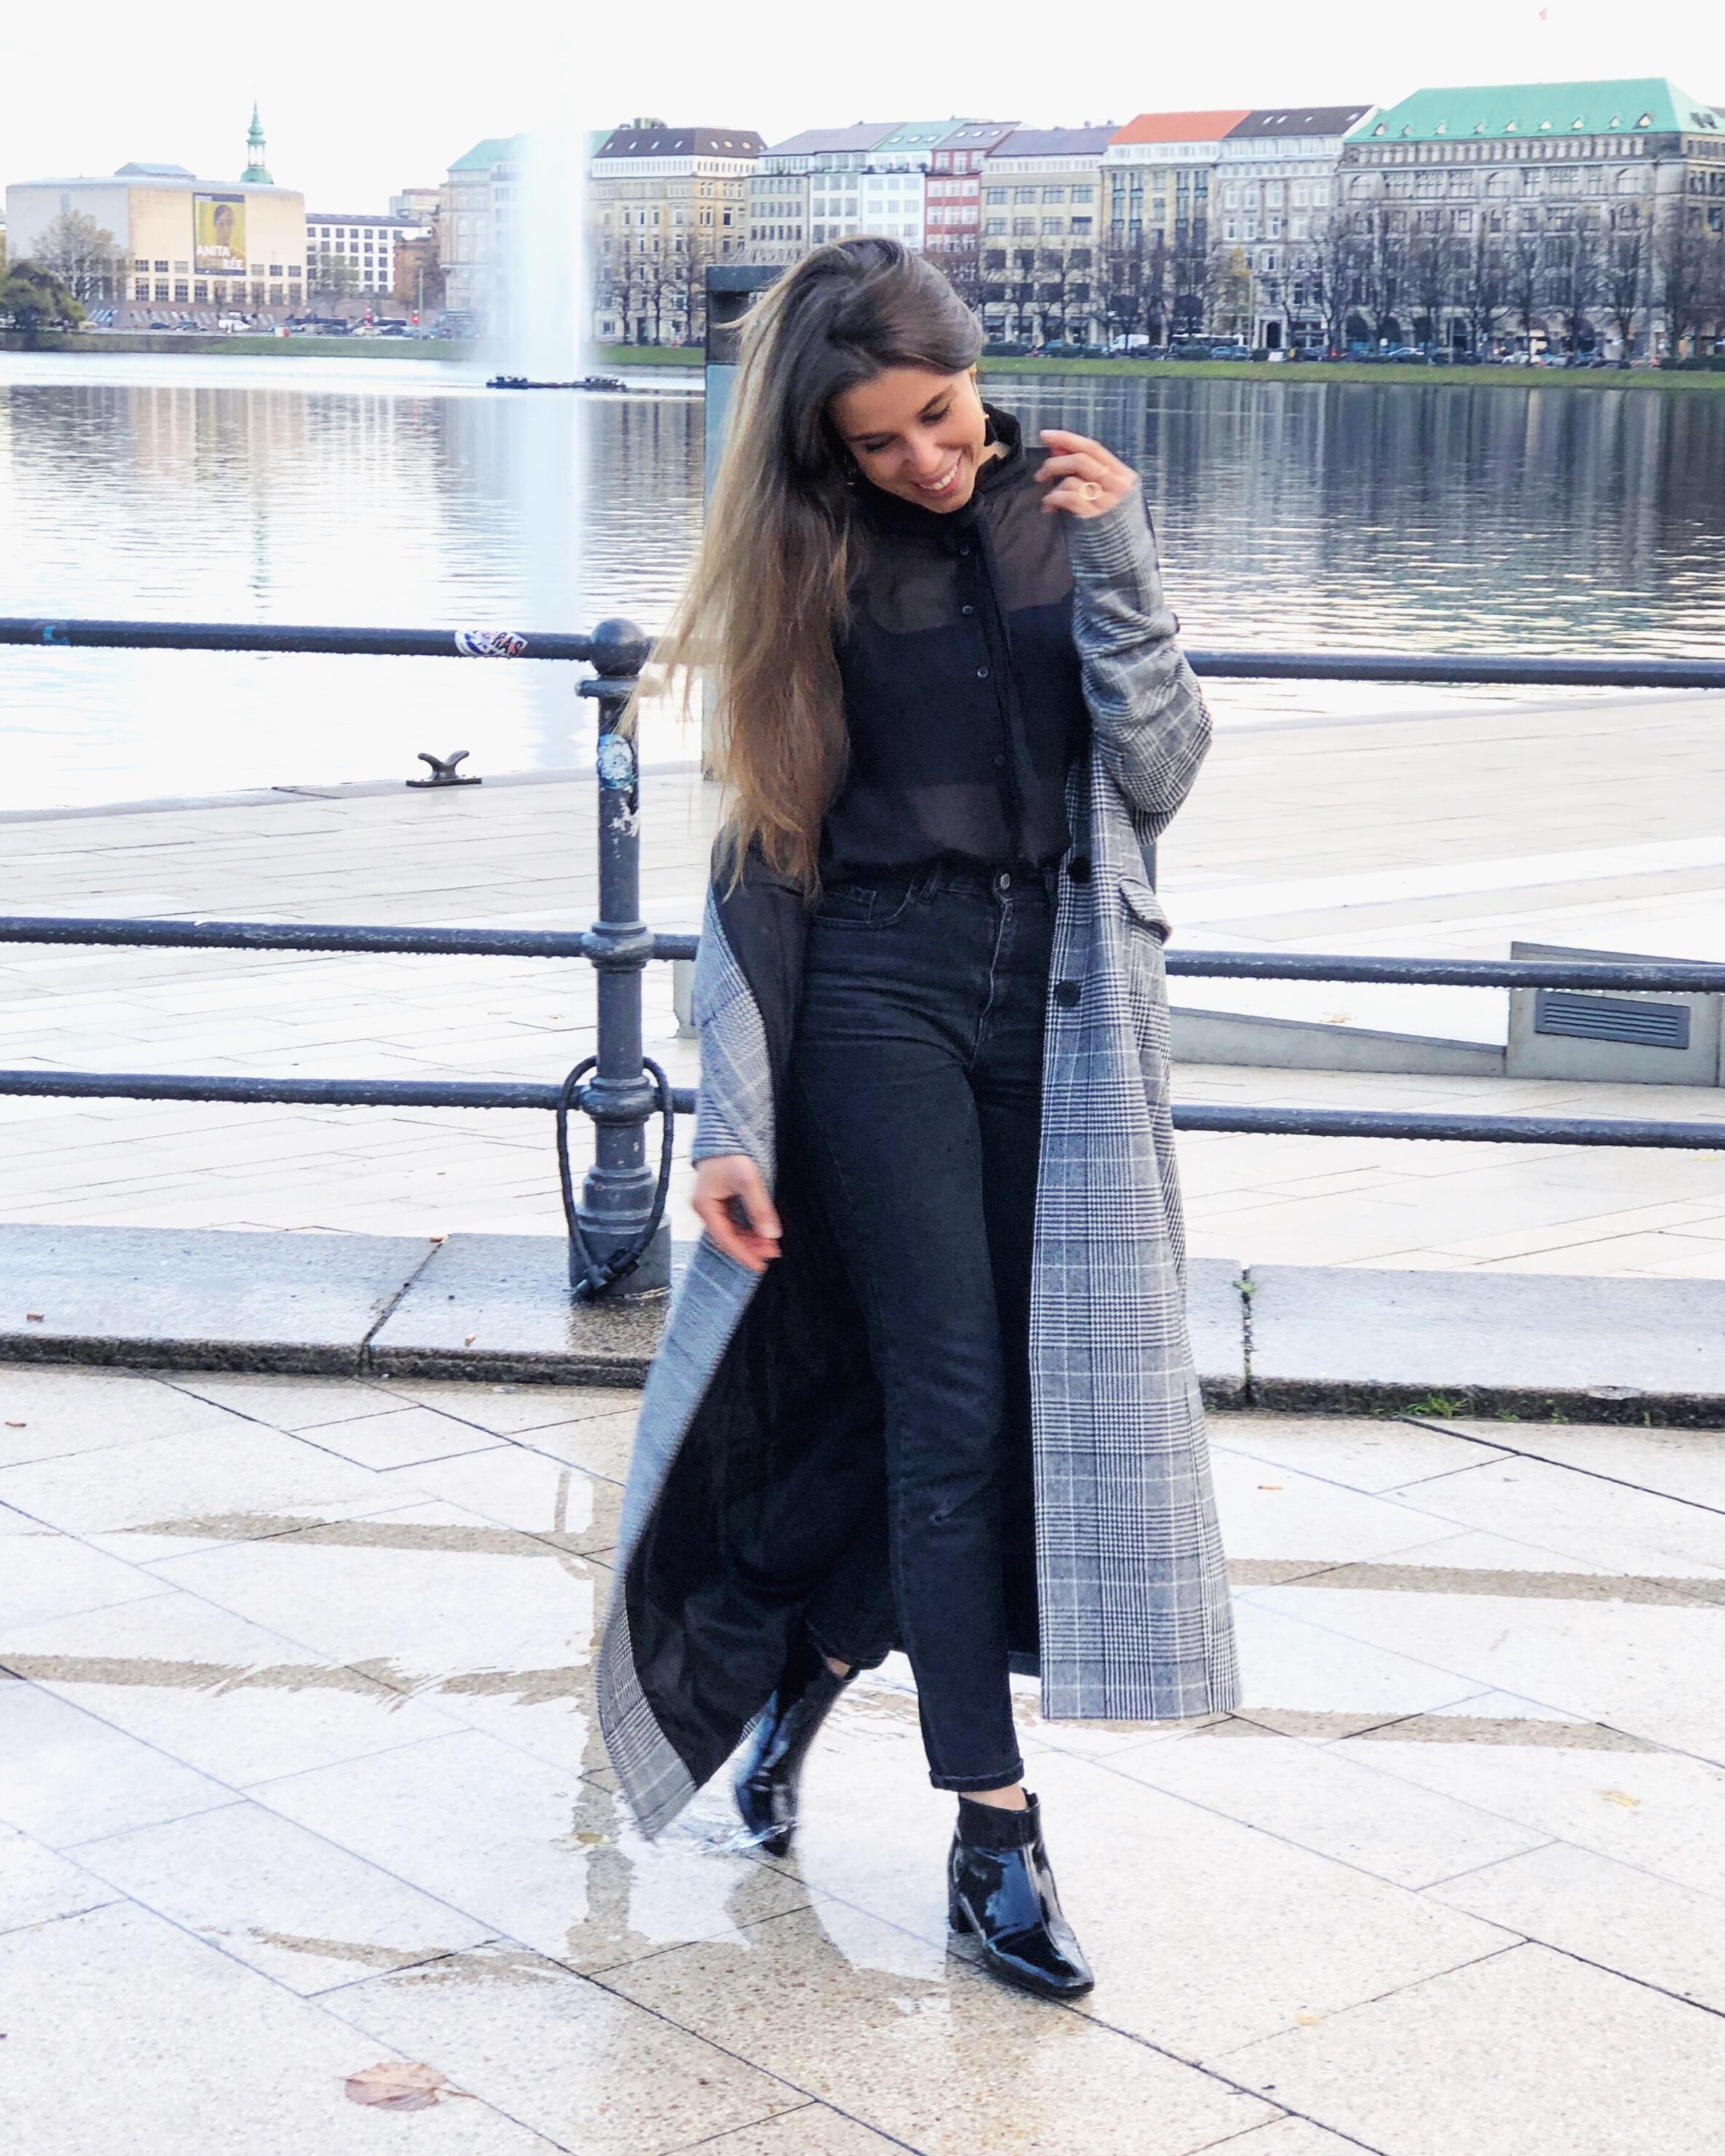 Alster Spaziergang #hh #040 #welovehh #longcoat #happygirl 